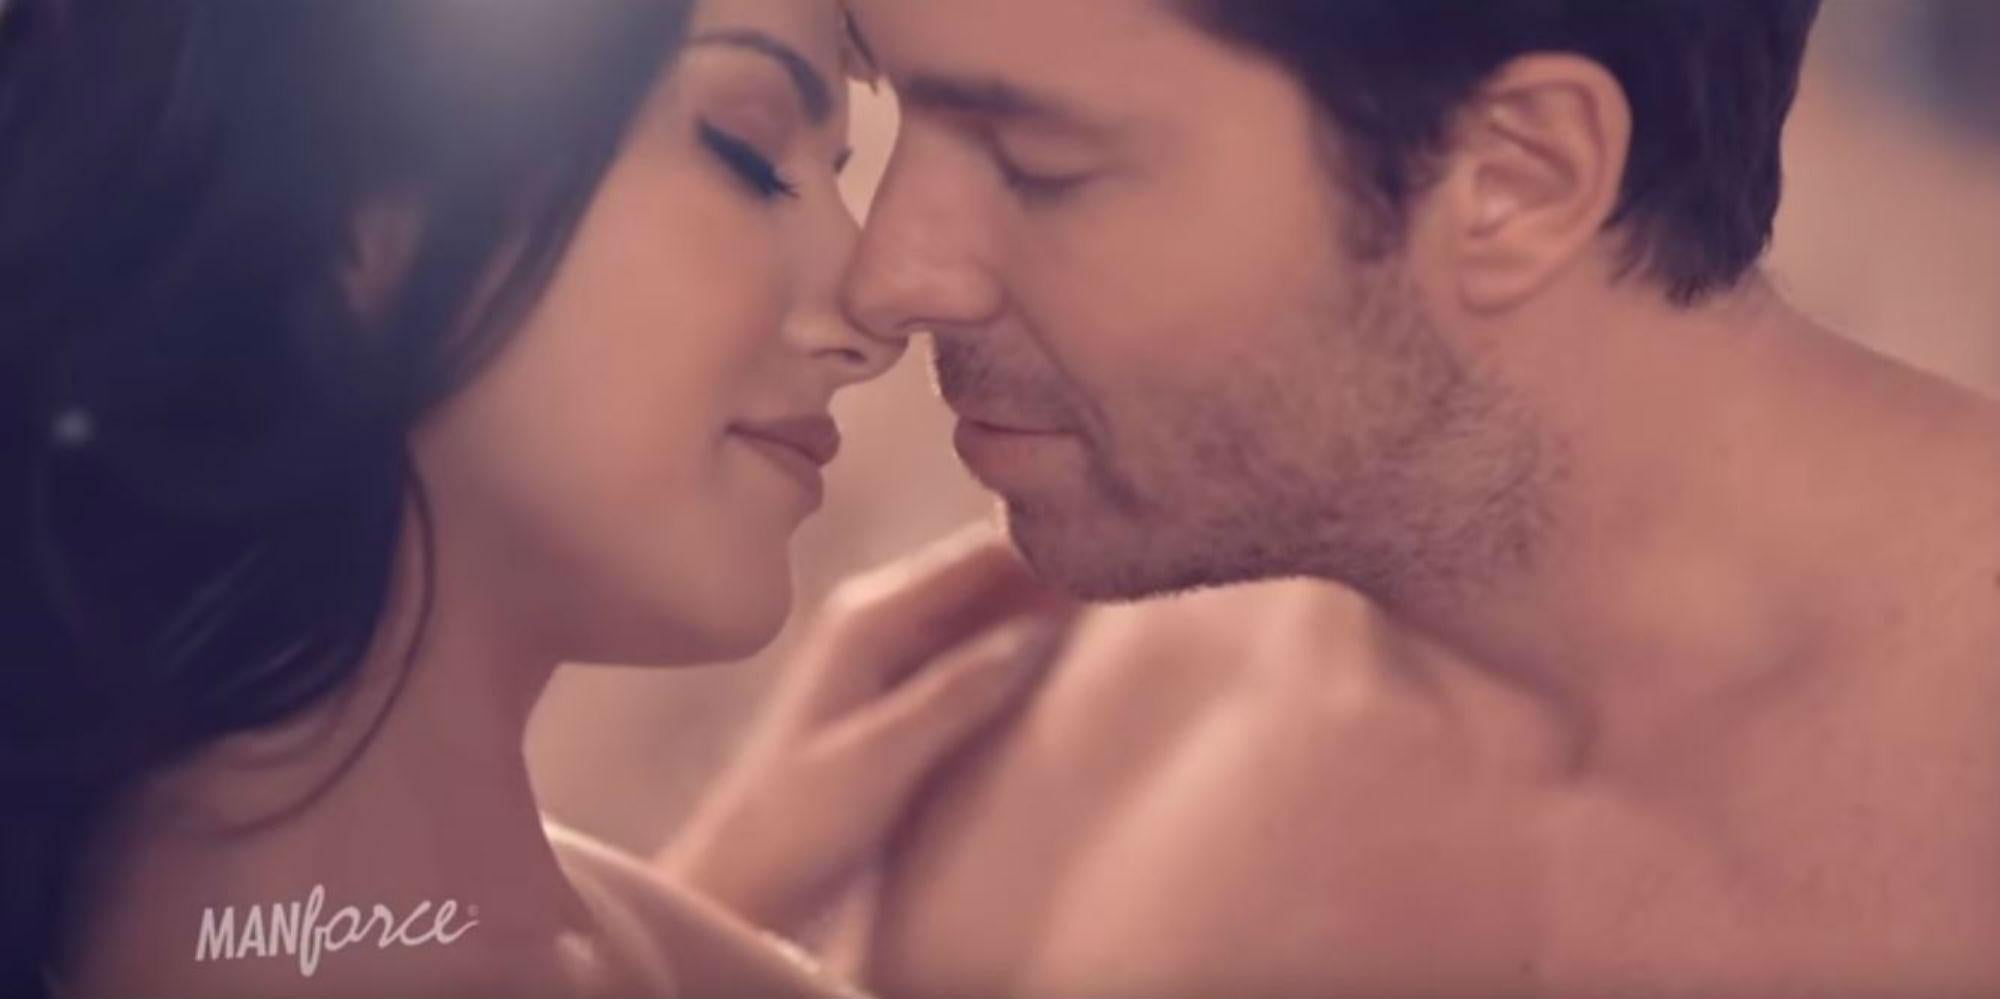 Porn Stars From India - A condom advert featuring an ex porn star is causing fury in ...